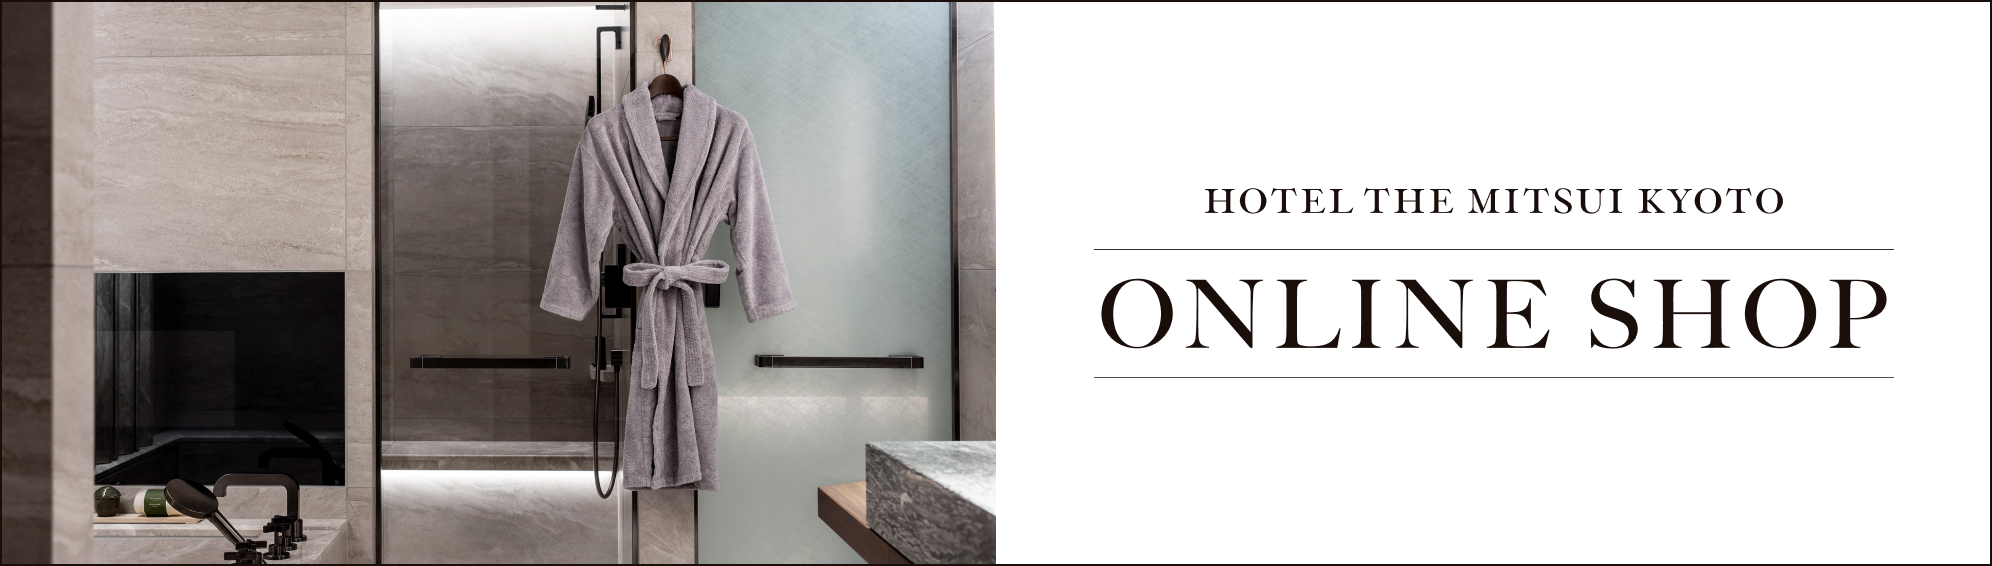 HOTEL THE MITSUI KYOTO ONLINE SHOP